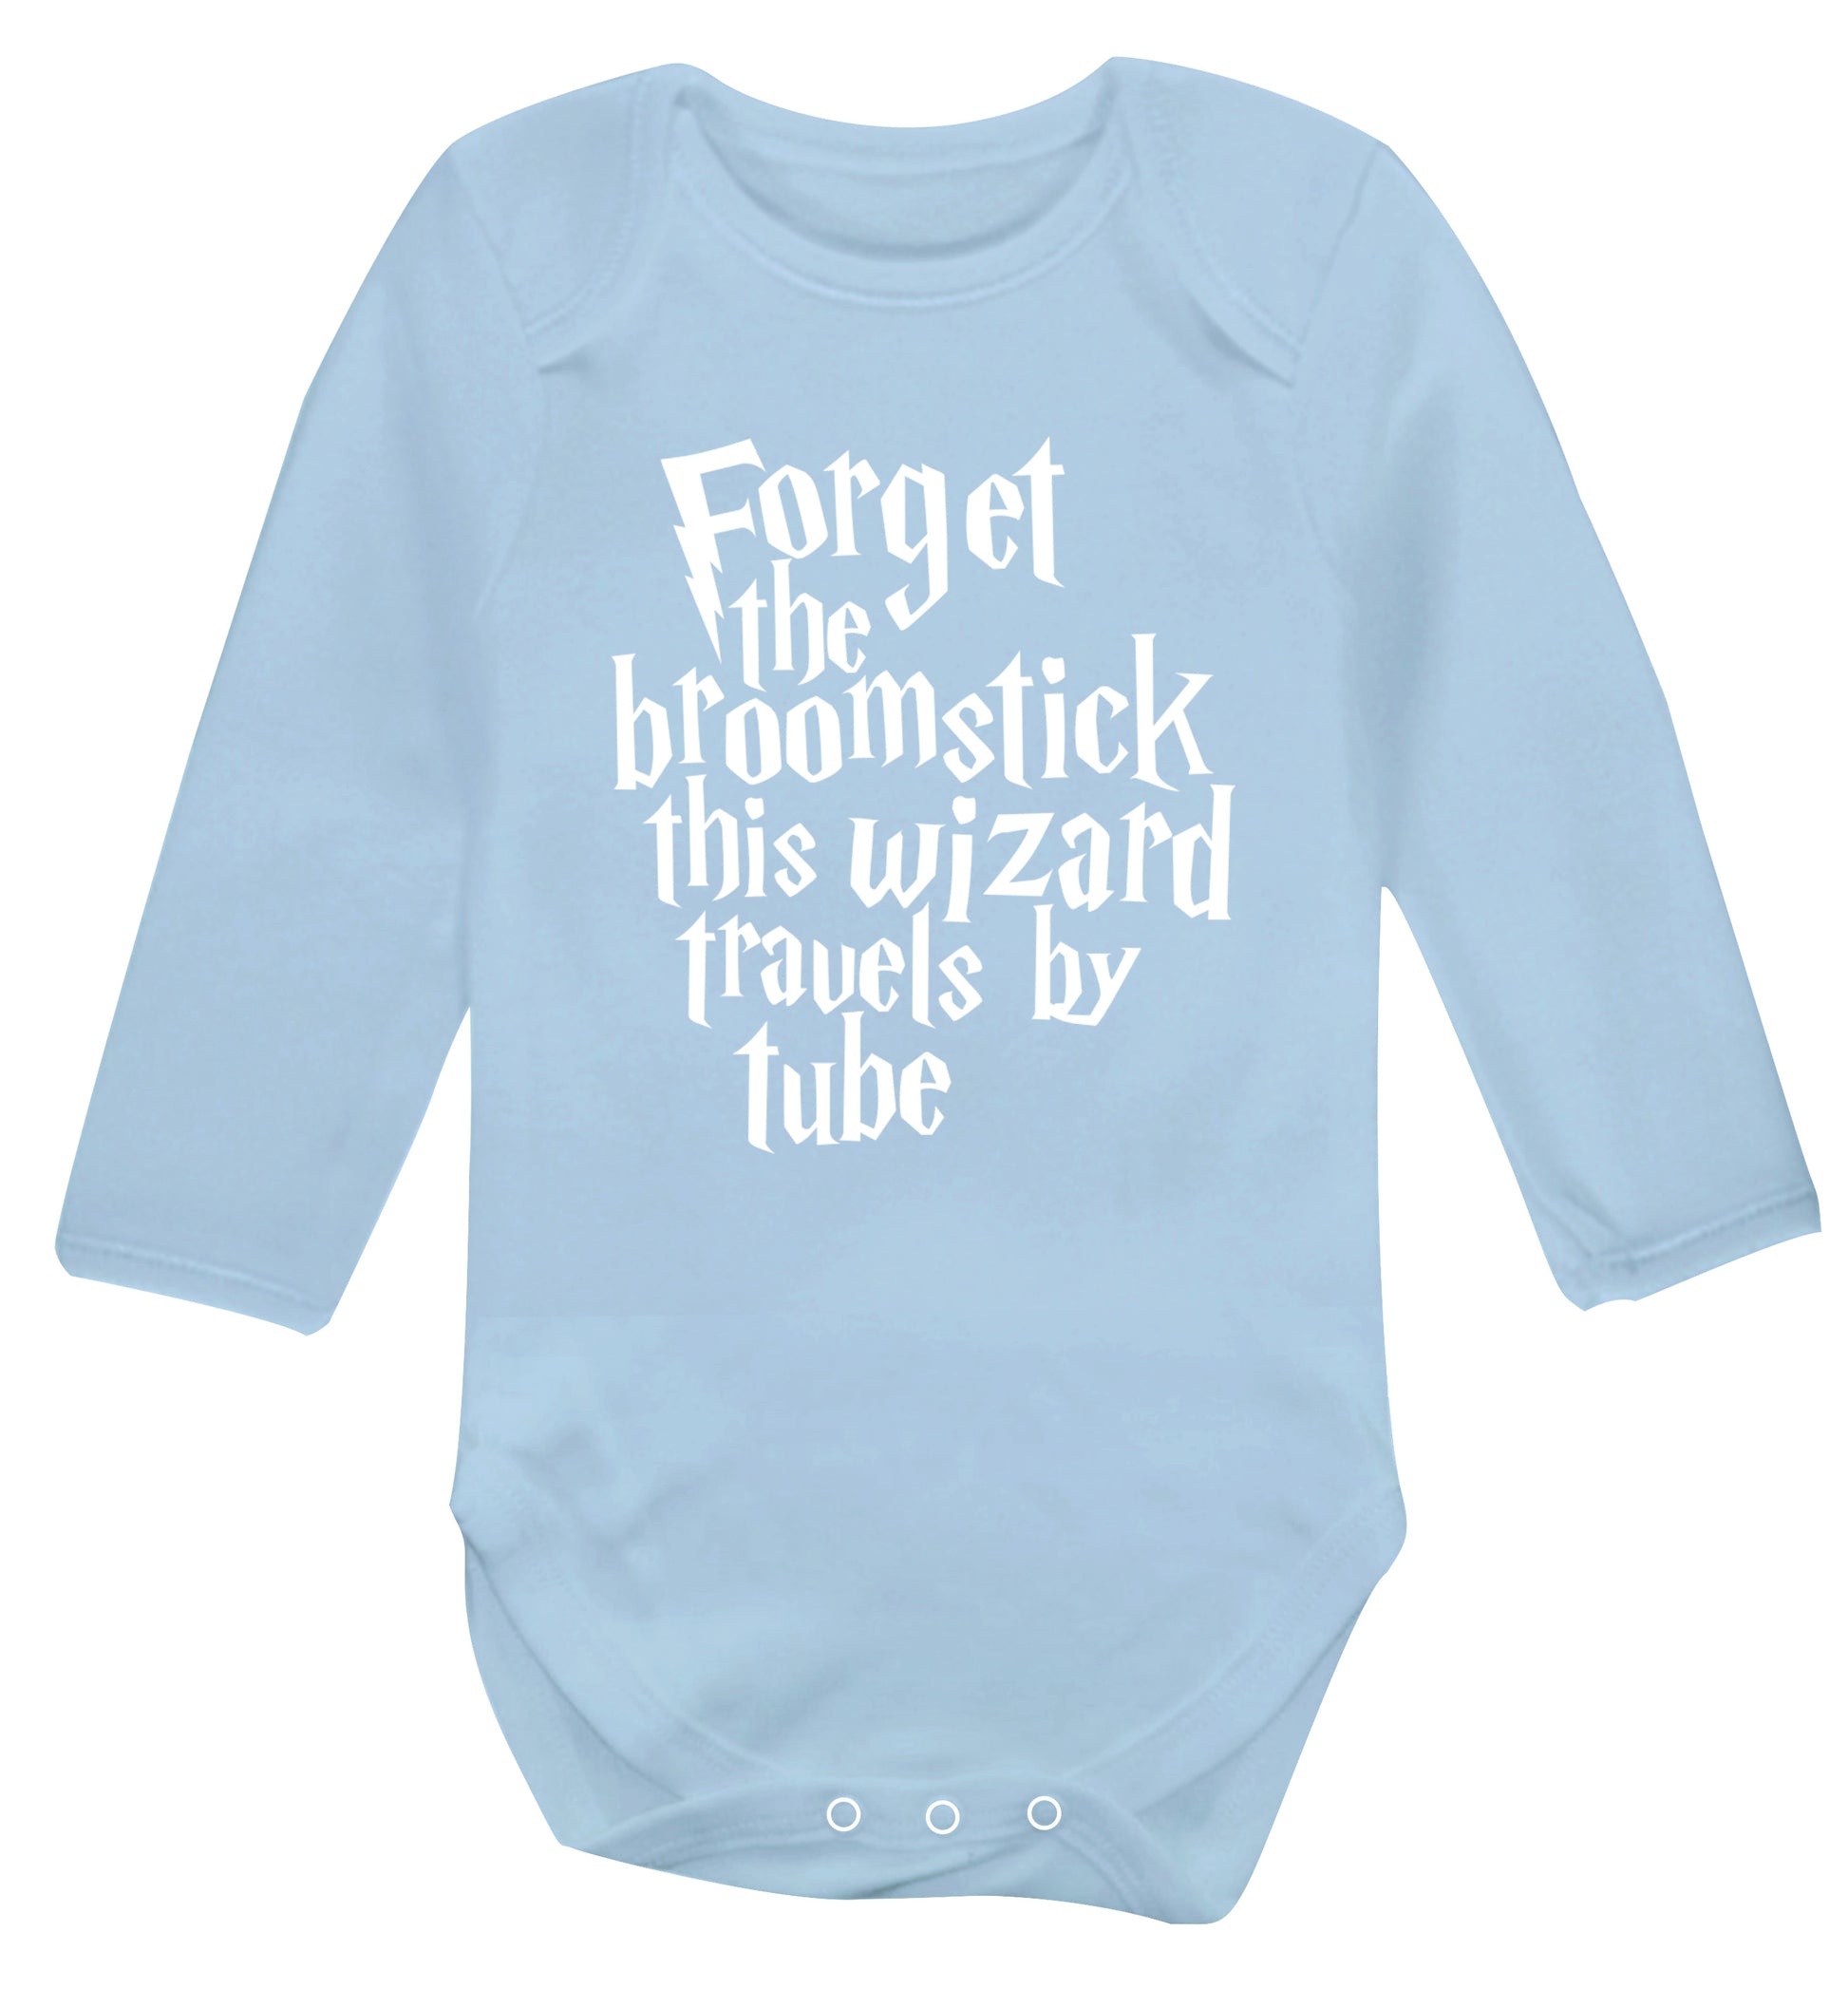 Forget the broomstick this wizard travels by tube Baby Vest long sleeved pale blue 6-12 months